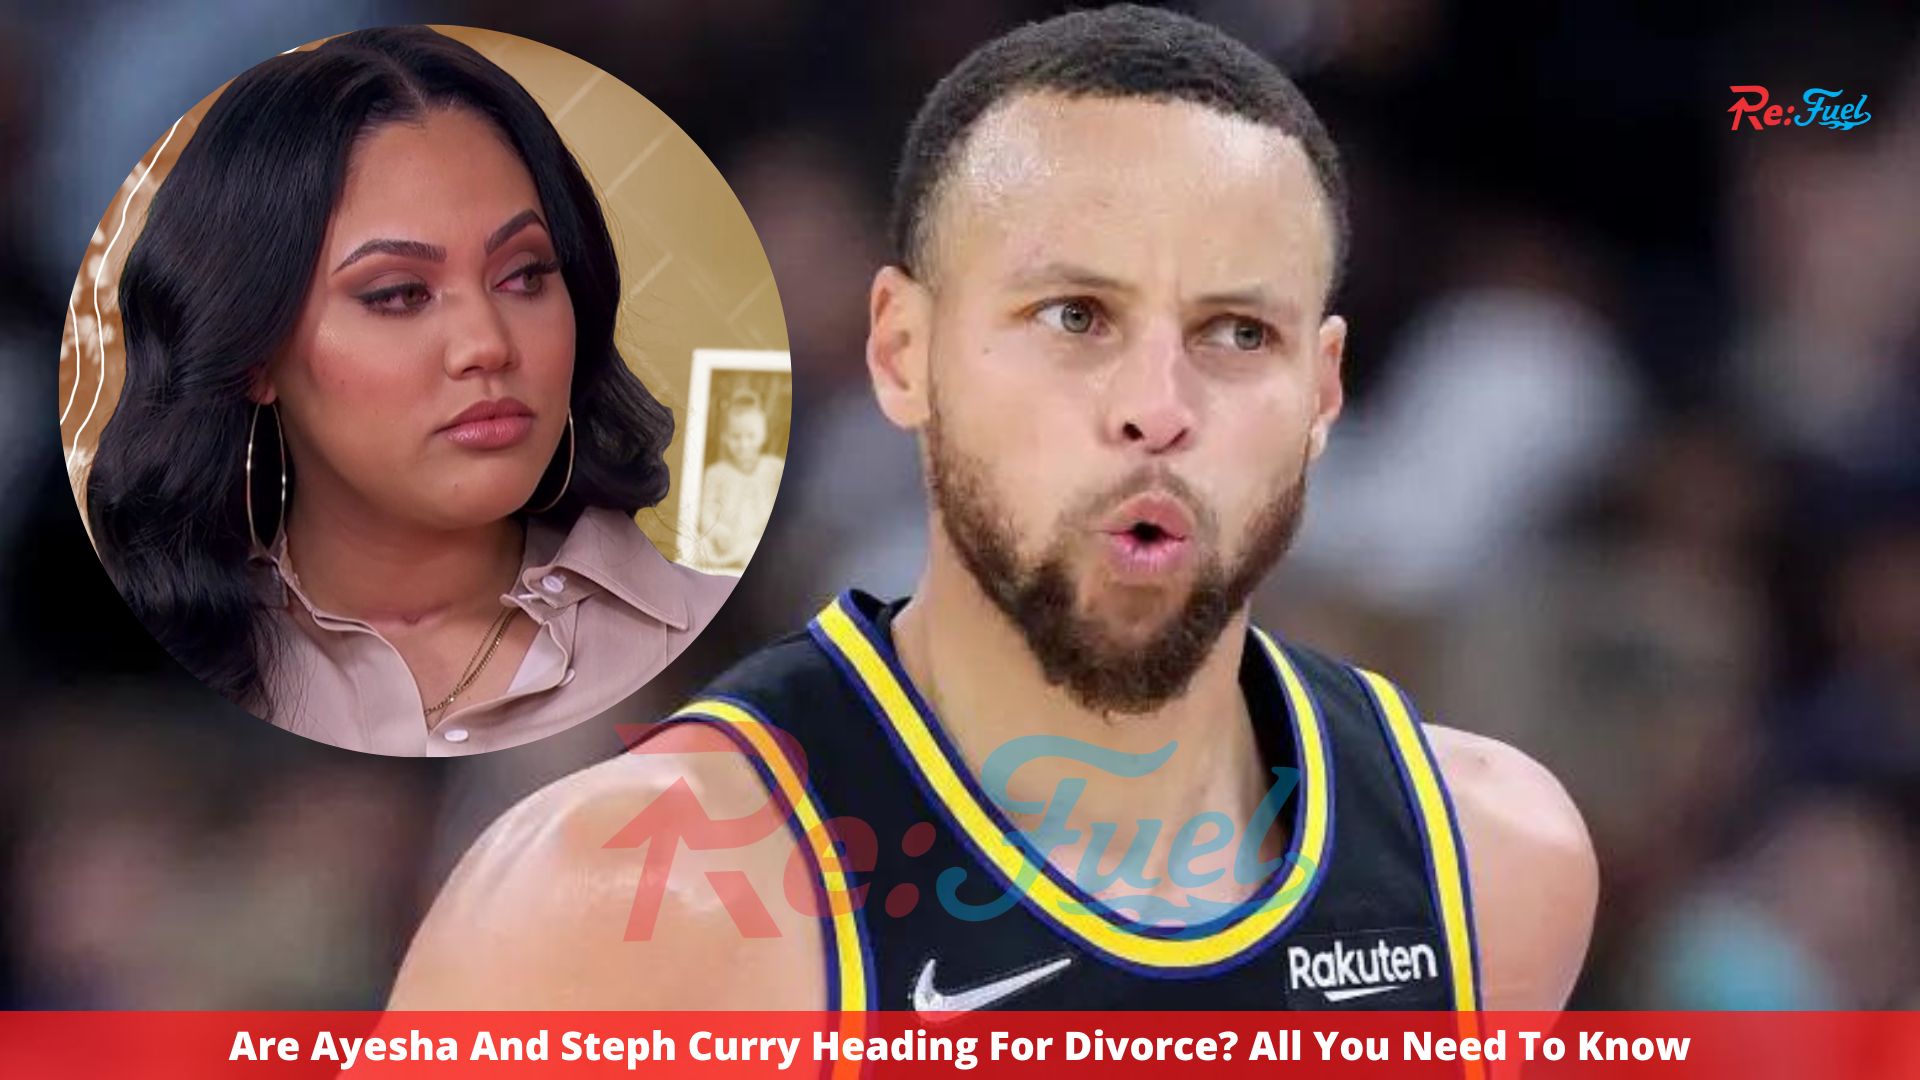 Are Ayesha And Steph Curry Heading For Divorce? All You Need To Know